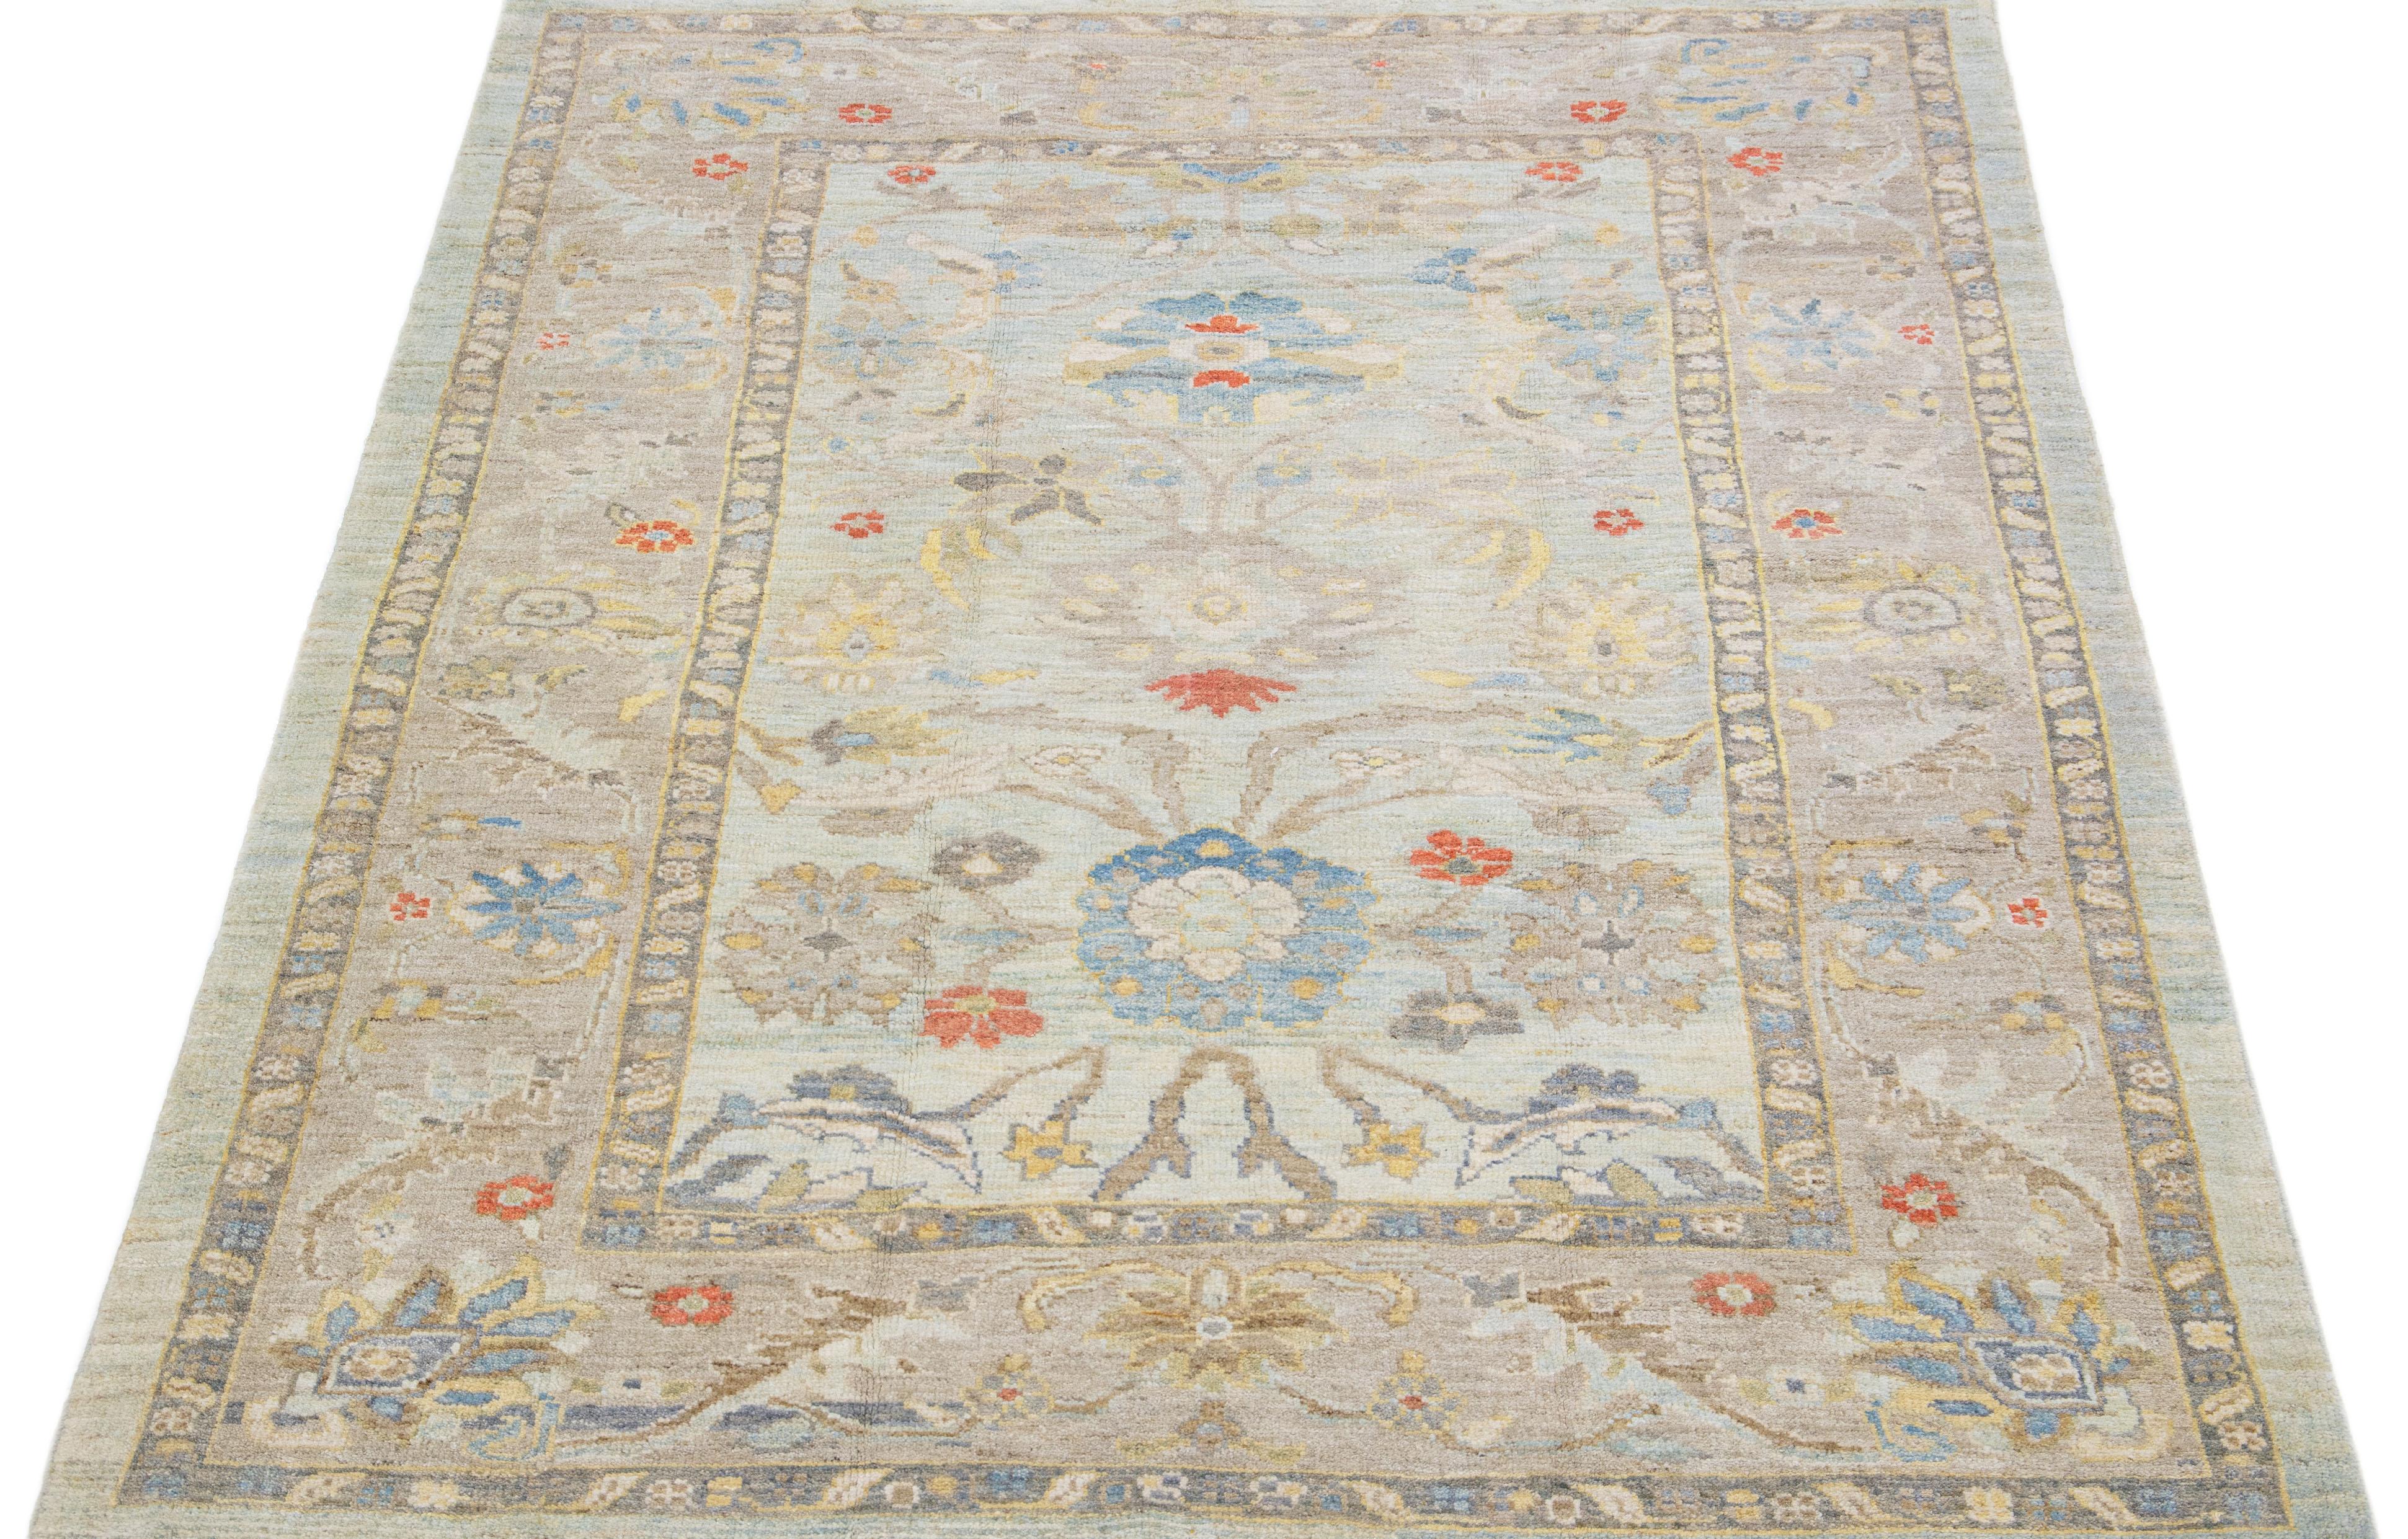 Beautiful modern Sultanabad hand-knotted wool rug with a blue color field. This rug has a designed frame with gray, yellow, and orange accents in a gorgeous all-over floral motif.

This rug measures: 5'10